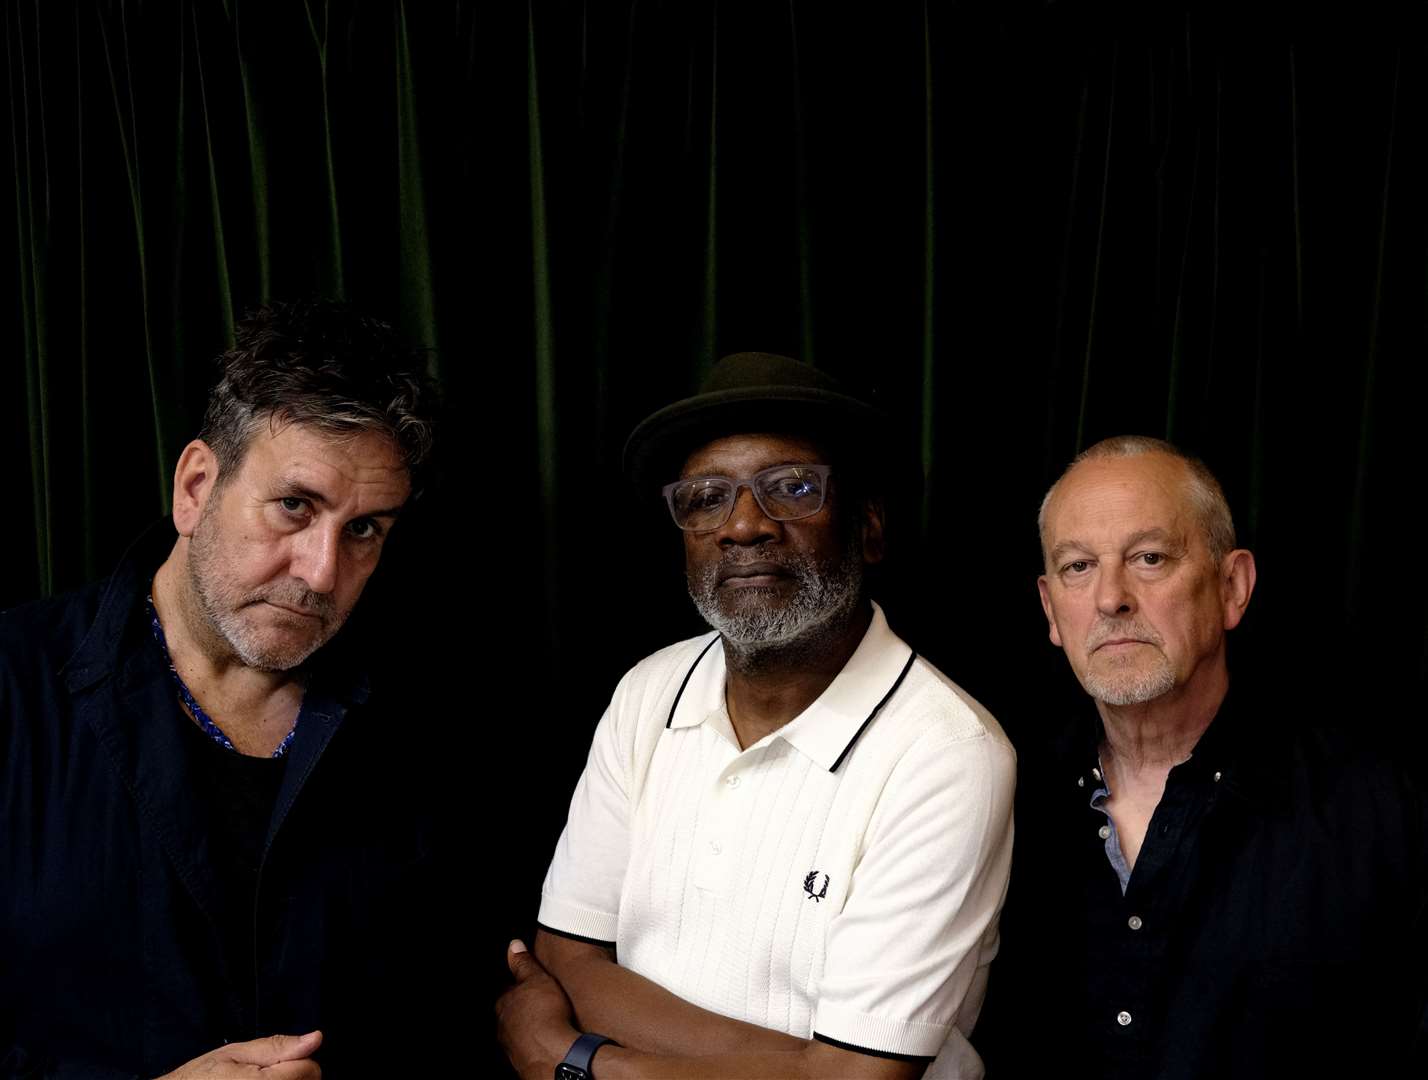 Closing the Rochester Castle Concerts will be a headline set from The Specials